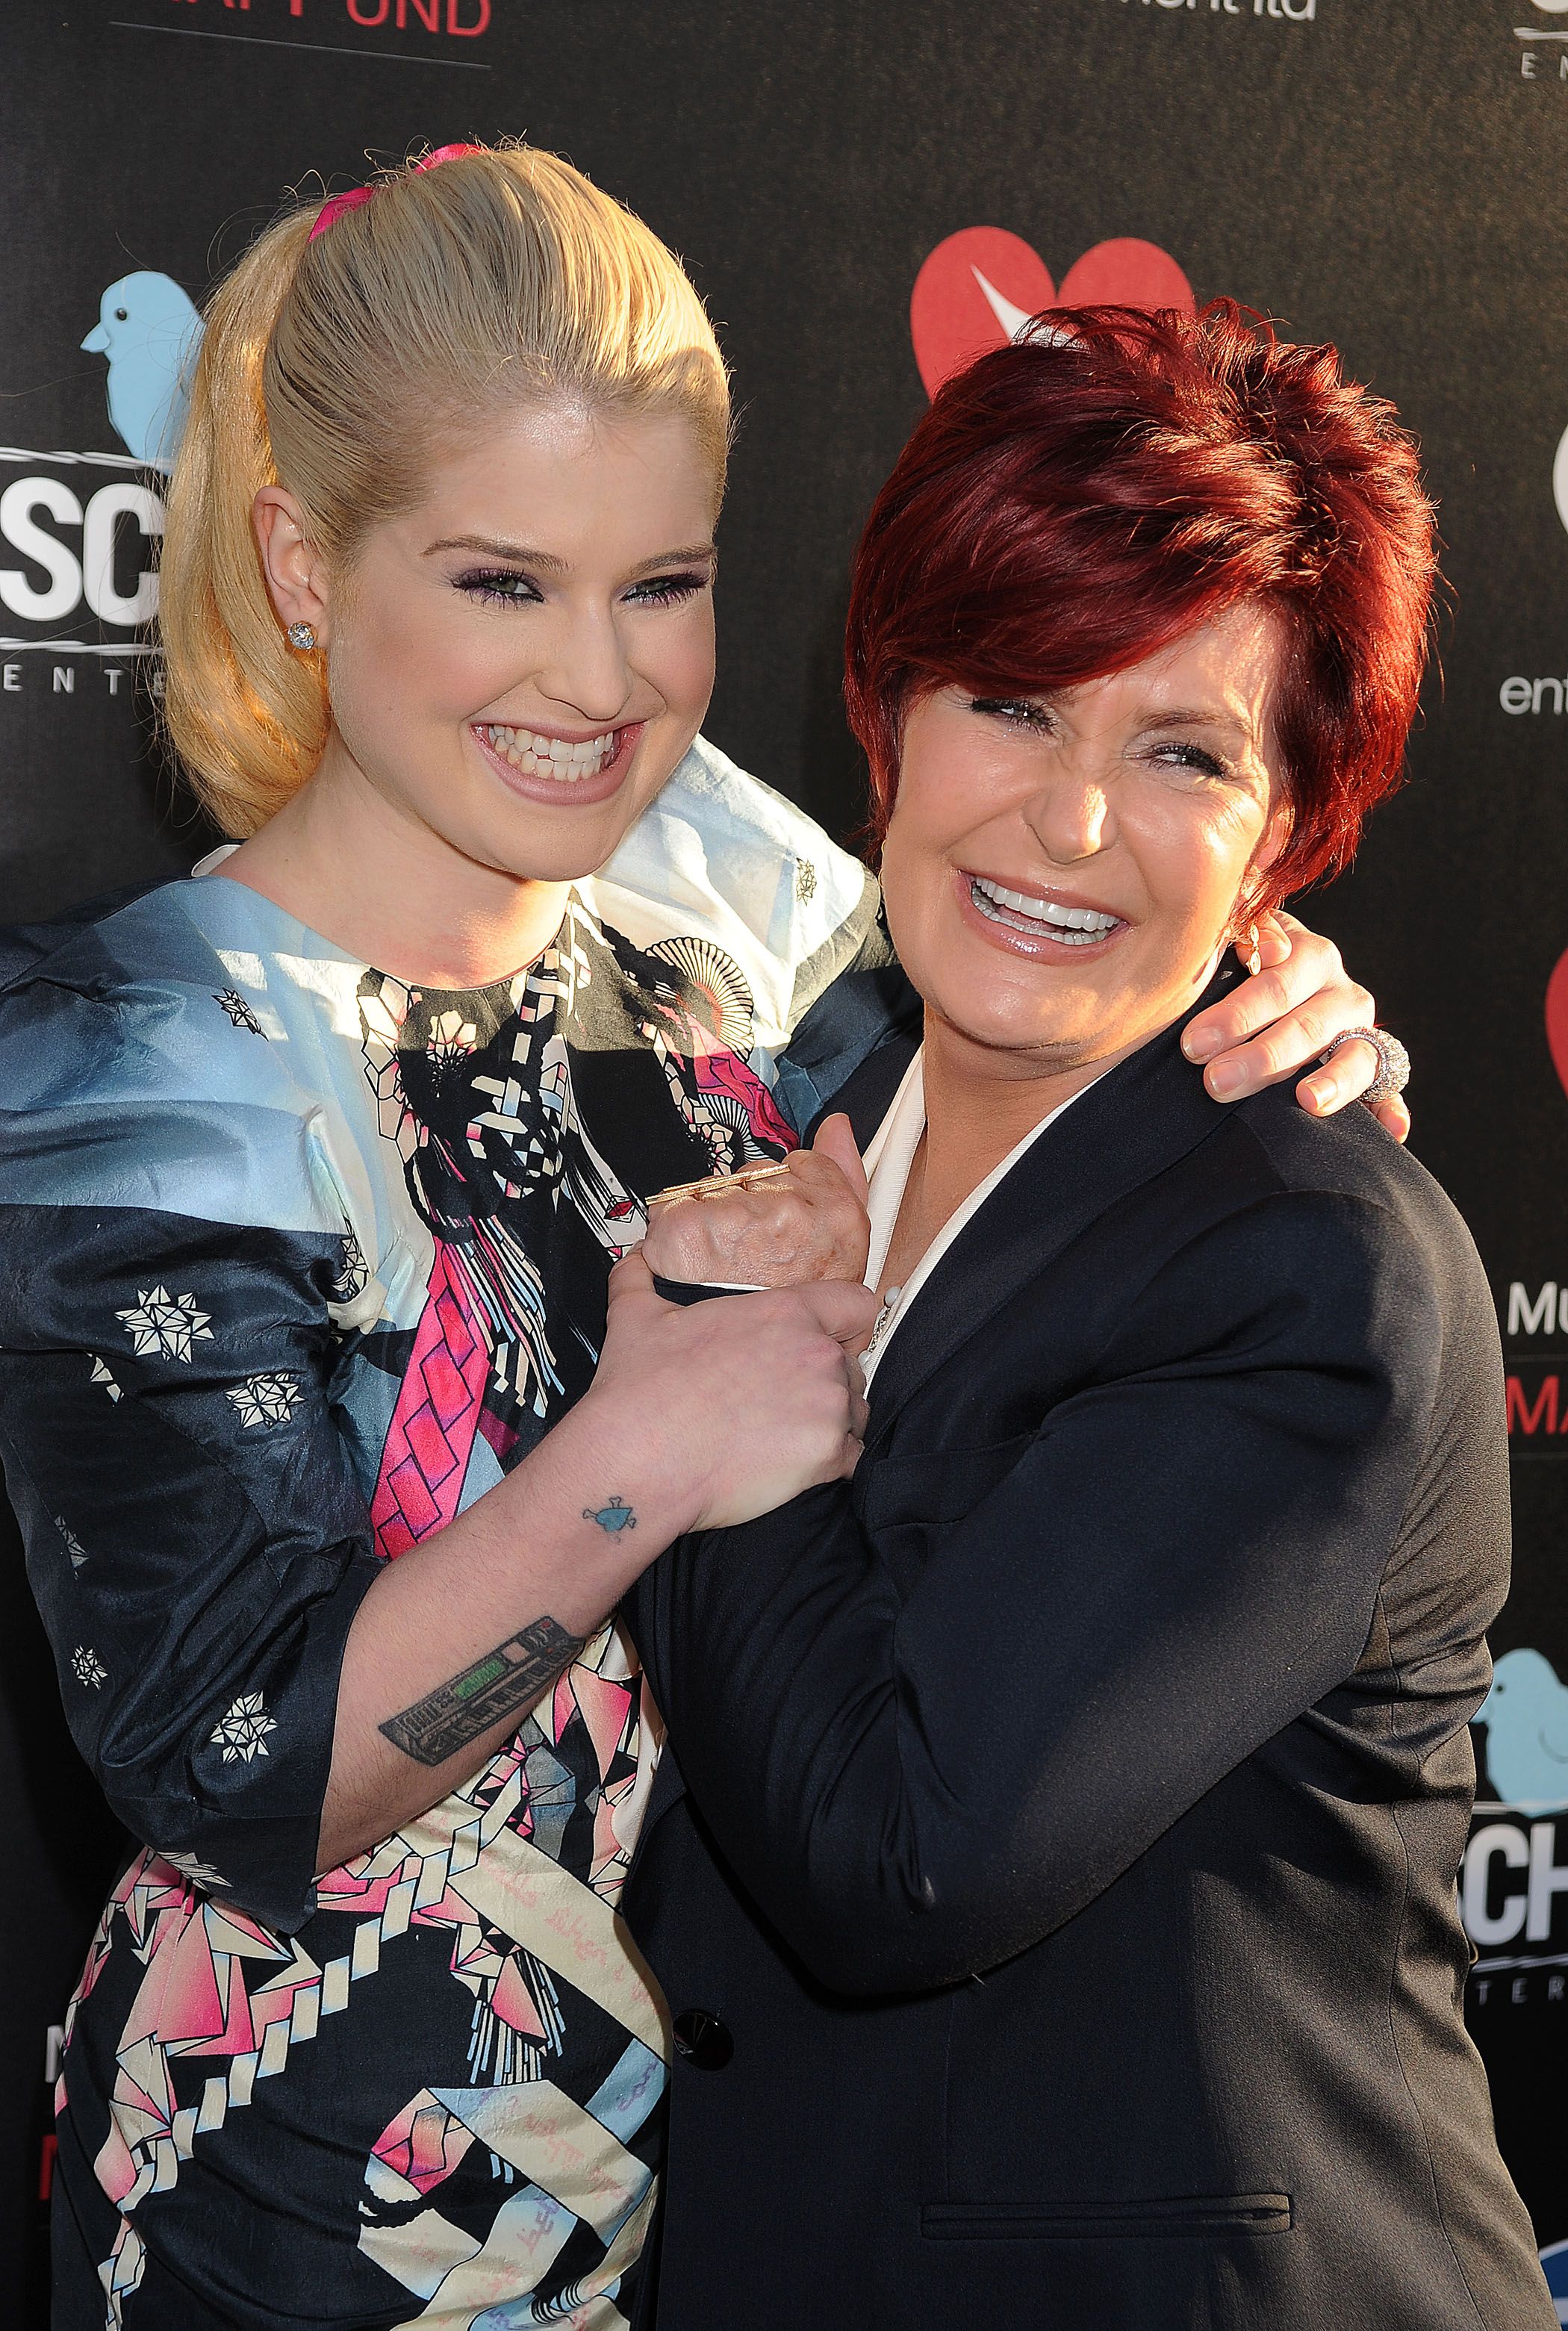 Kelly Osbourne and Sharon Osbourne during the Los Angeles premiere of "God Bless Ozzy Osbourne" at the ArcLight Cinerama Dome on August 22, 2011, in Hollywood, California. | Source: Getty Images